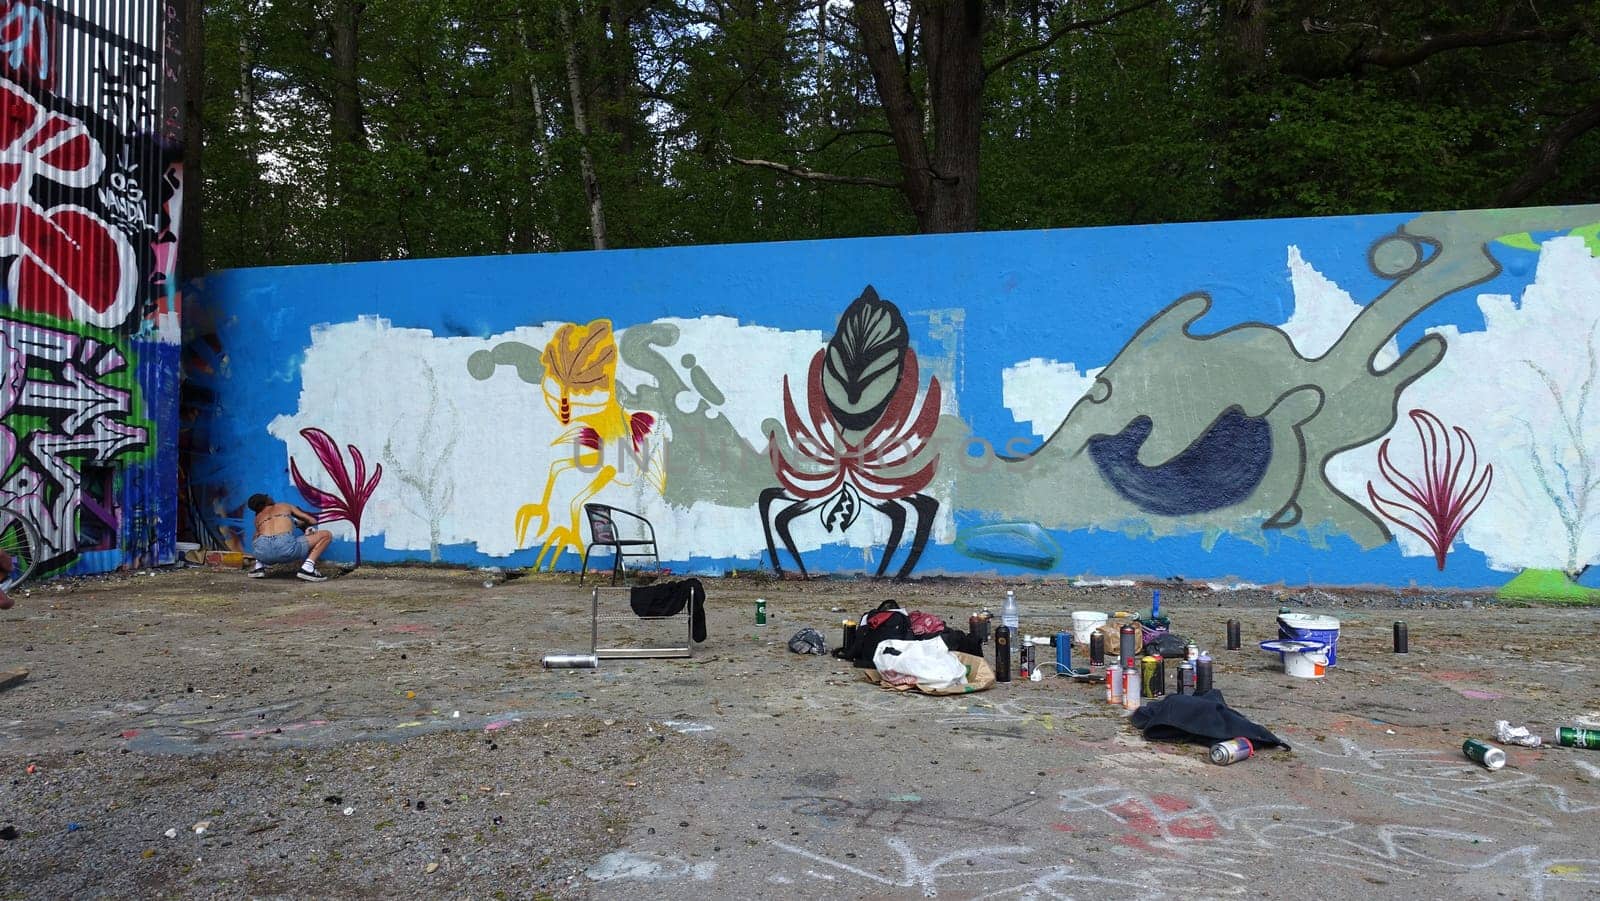 Stockholm, Snosatra, Sweden, May 23 2021. Graffiti exhibition on the outskirts of the city. During.